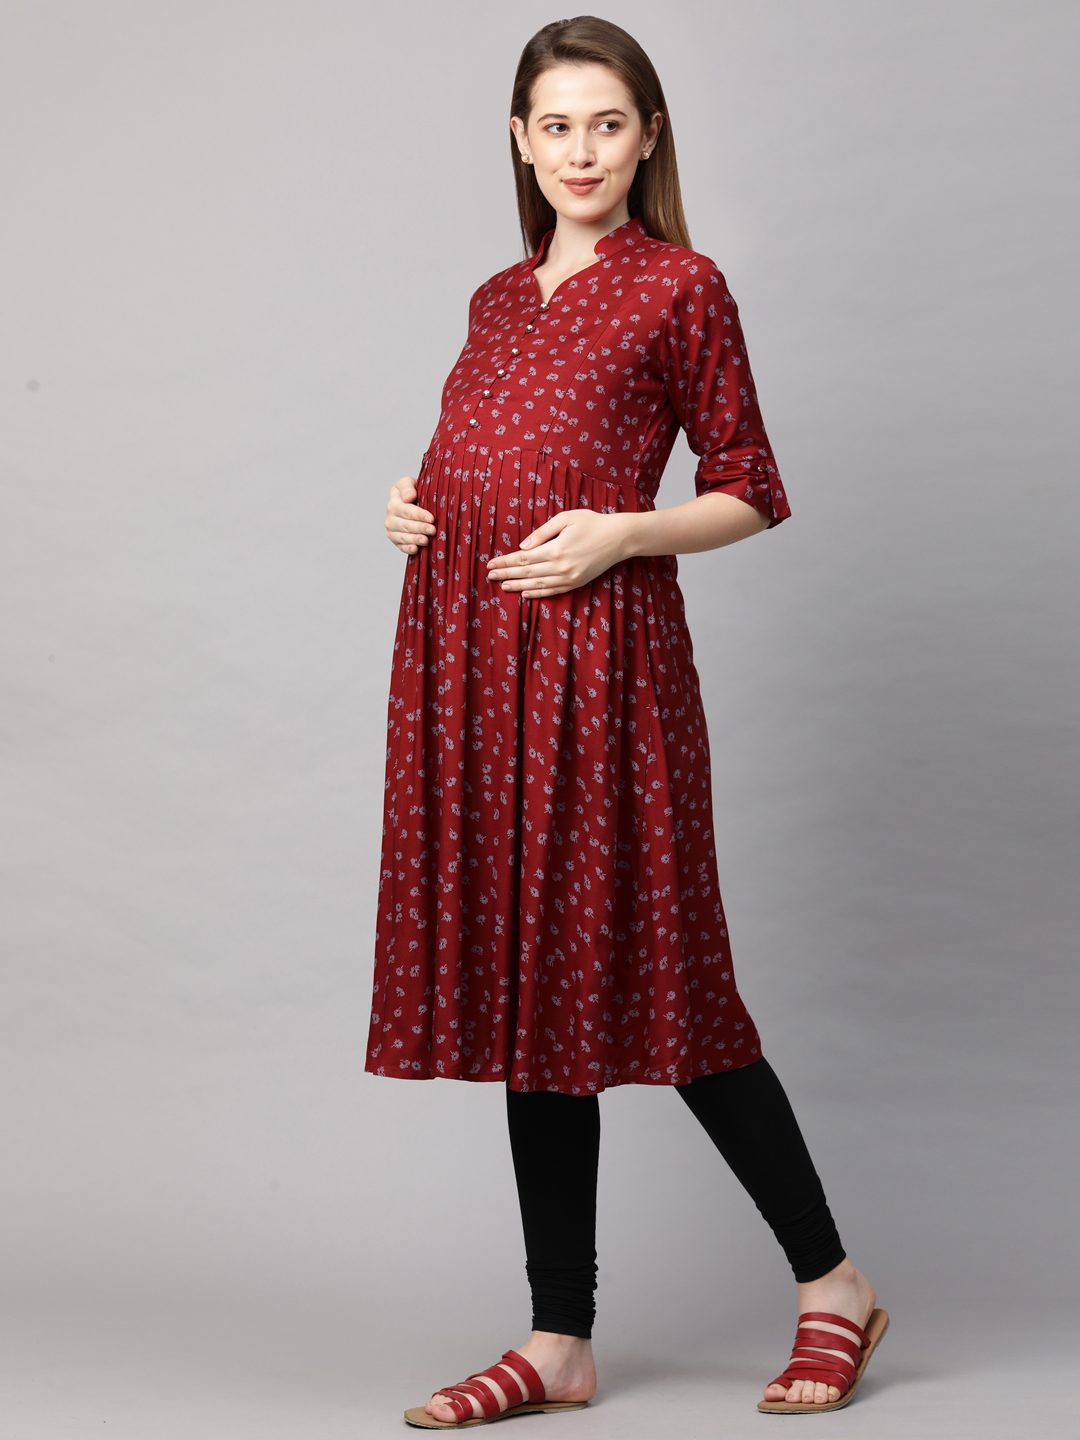 Buy UTKRISHTA Present Russel Net Knee Length Fully Stitched A-line Kurti  for Women & Girls on Jeans, Laggies, Pant, Jegging, Jogger's (X-Large, Red)  at Amazon.in